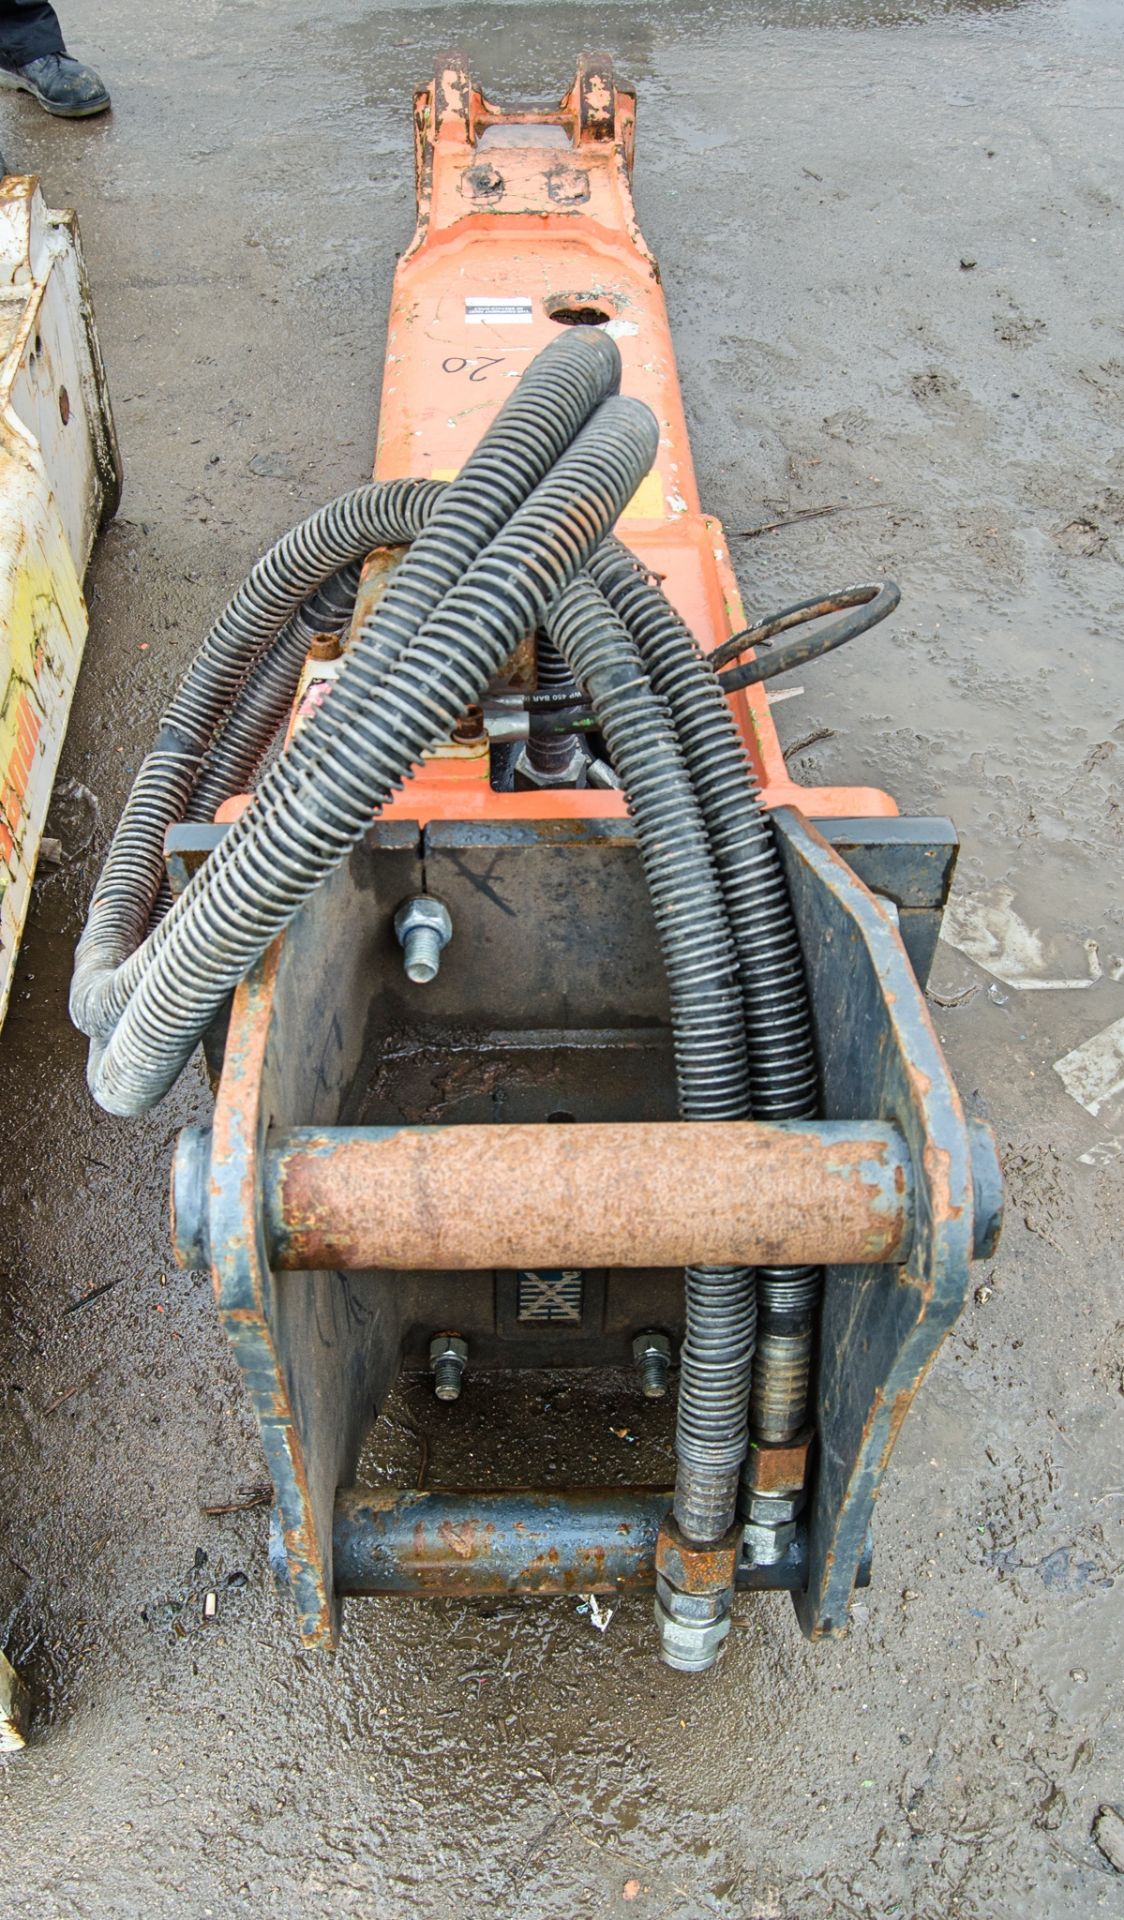 Construction Tools RX14L hydraulic breaker to suit 13-18 tonne excavator Year: 2019 S/N: DEQ191642 - Image 4 of 4